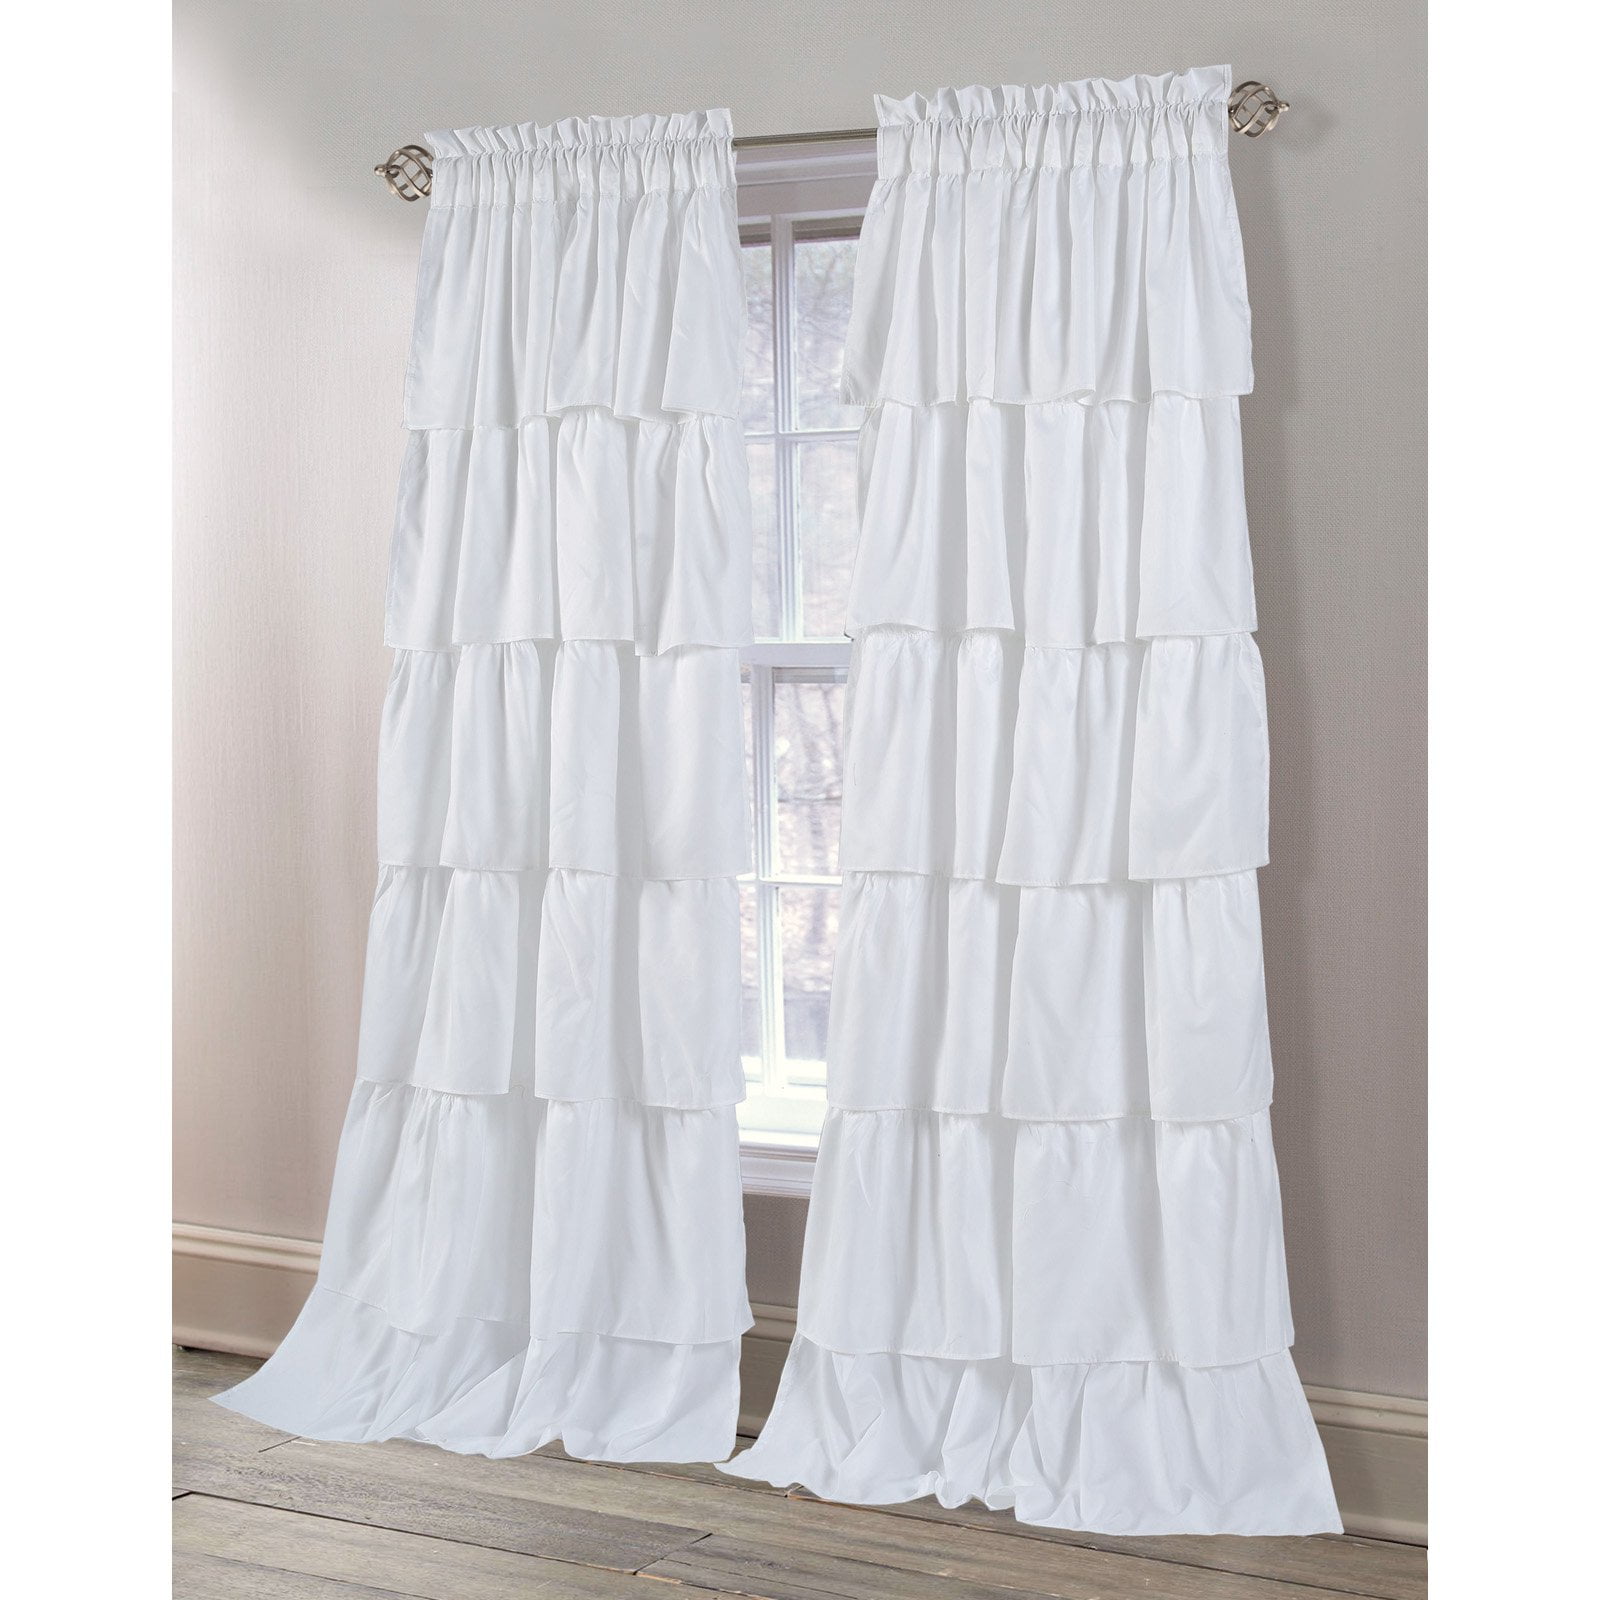 Gypsy Ruffled Layerd Sheer Curtain Panel 60" wide by 63" long Cream One 1 